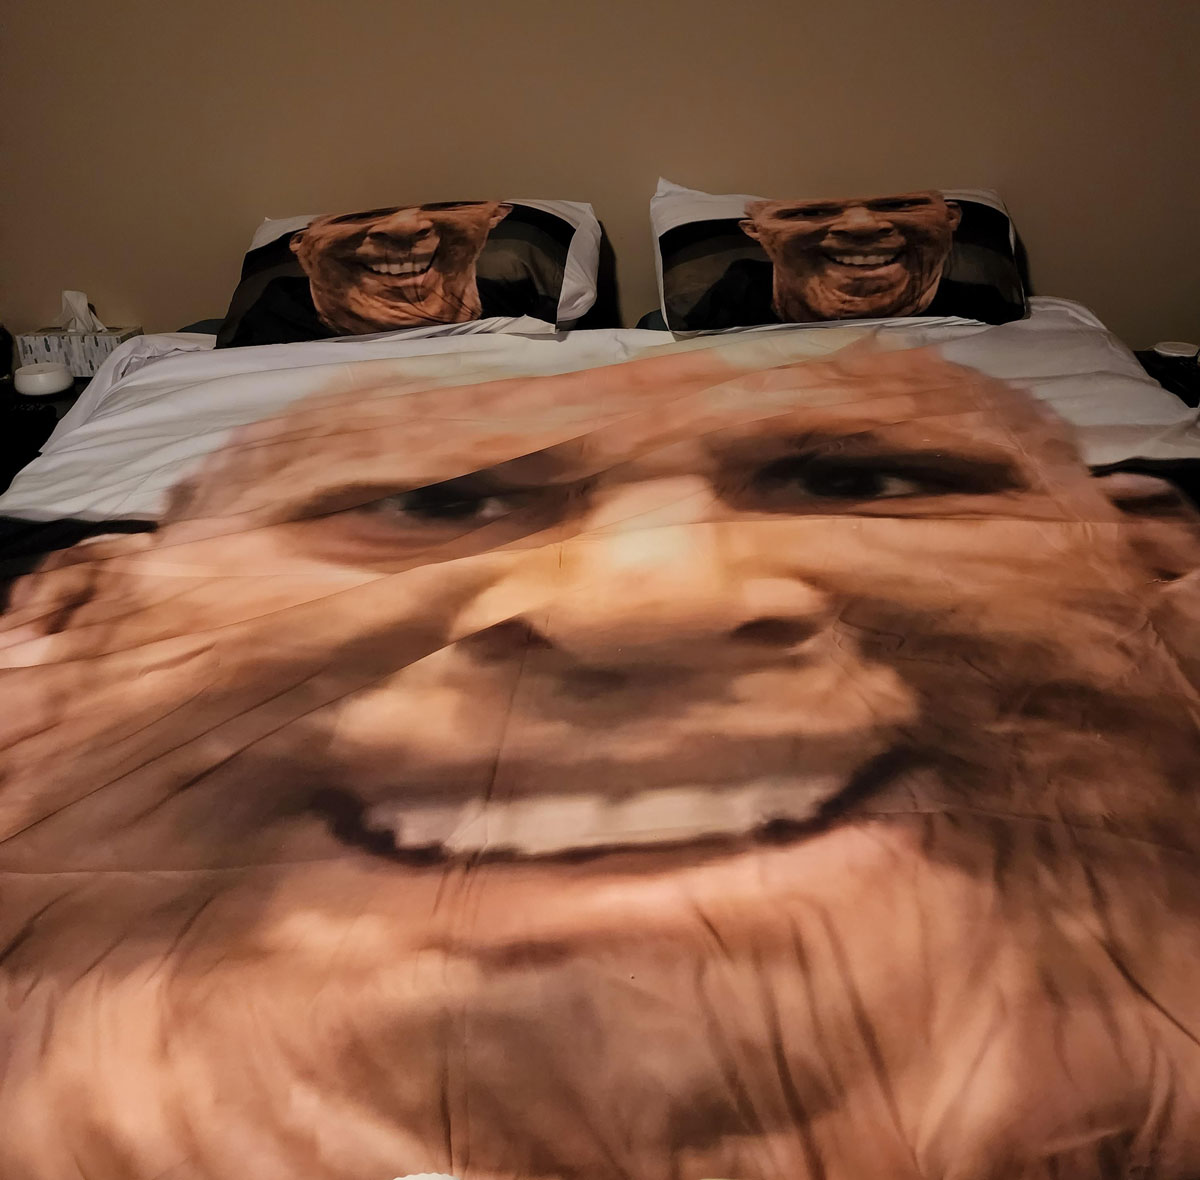 Daughter's got us these for Christmas. Decided to put them on the bed for us since we kept "forgetting"